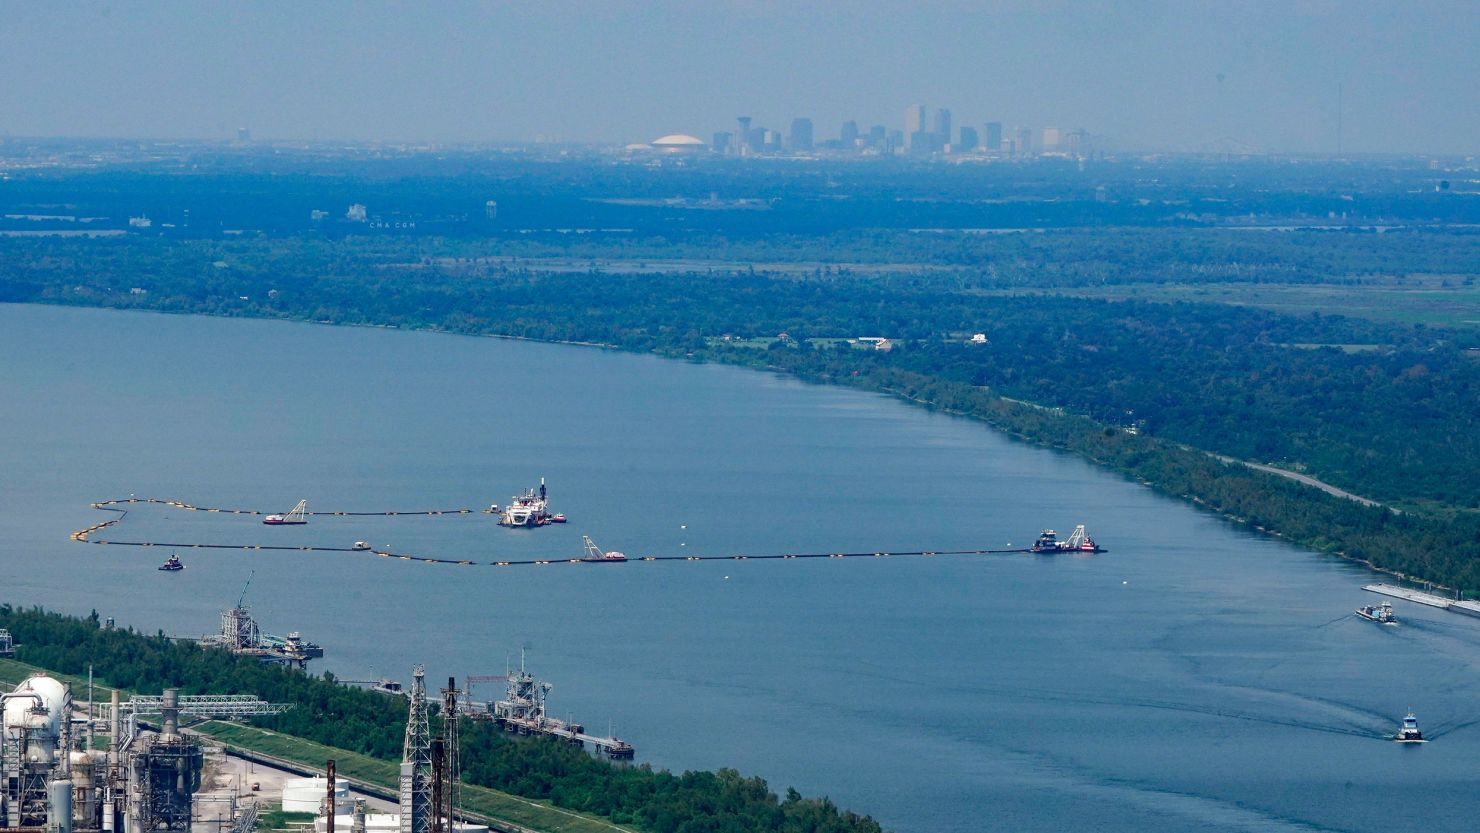 In this aerial photo, dredging operations to build an underwater sill are seen, with the city of New Orleans in the background.